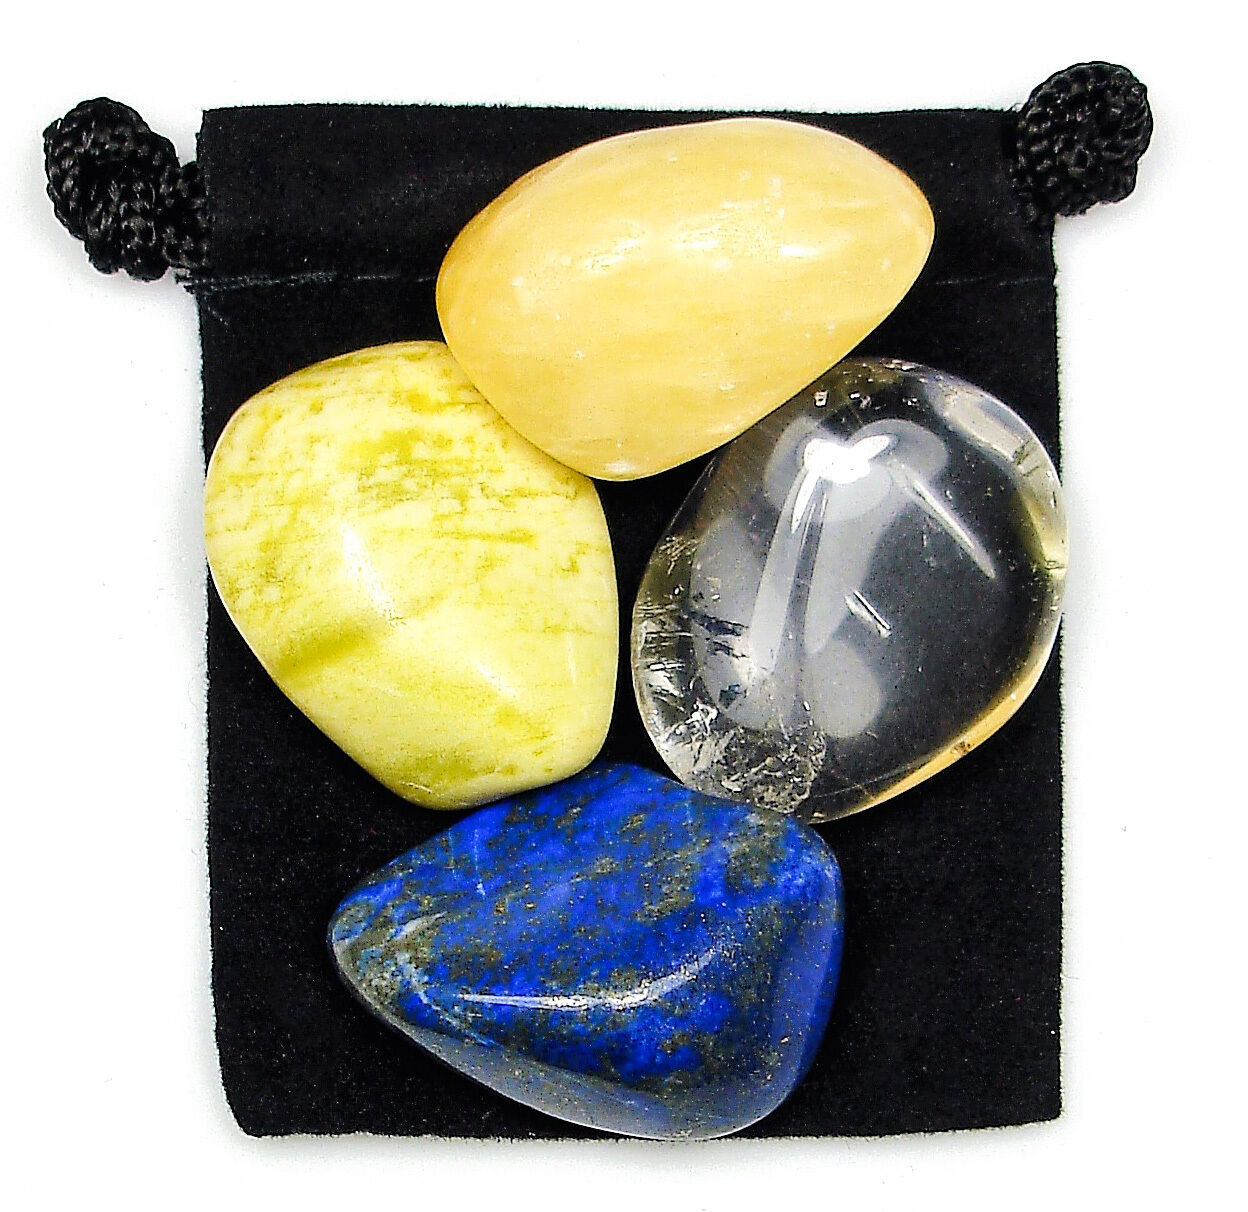 SPIRITUAL JOURNEY Tumbled Crystal Healing Set = 4 Stones + Pouch + Card